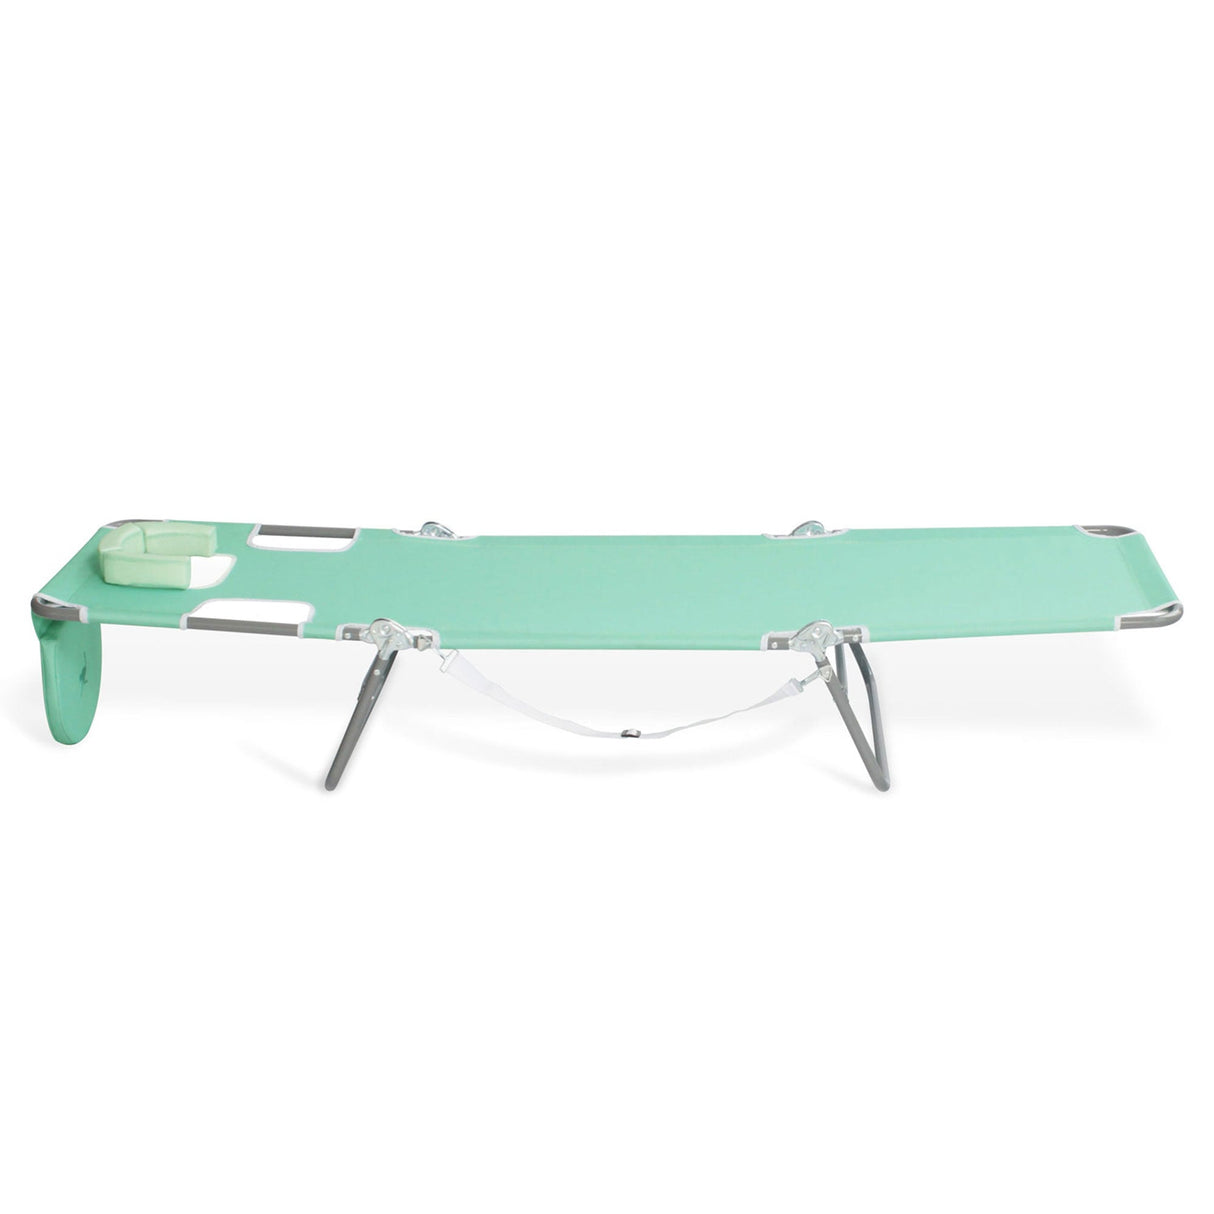 Ostrich Chaise Lounge, Portable Facedown Beach Camping Pool Tanning Chair, Teal